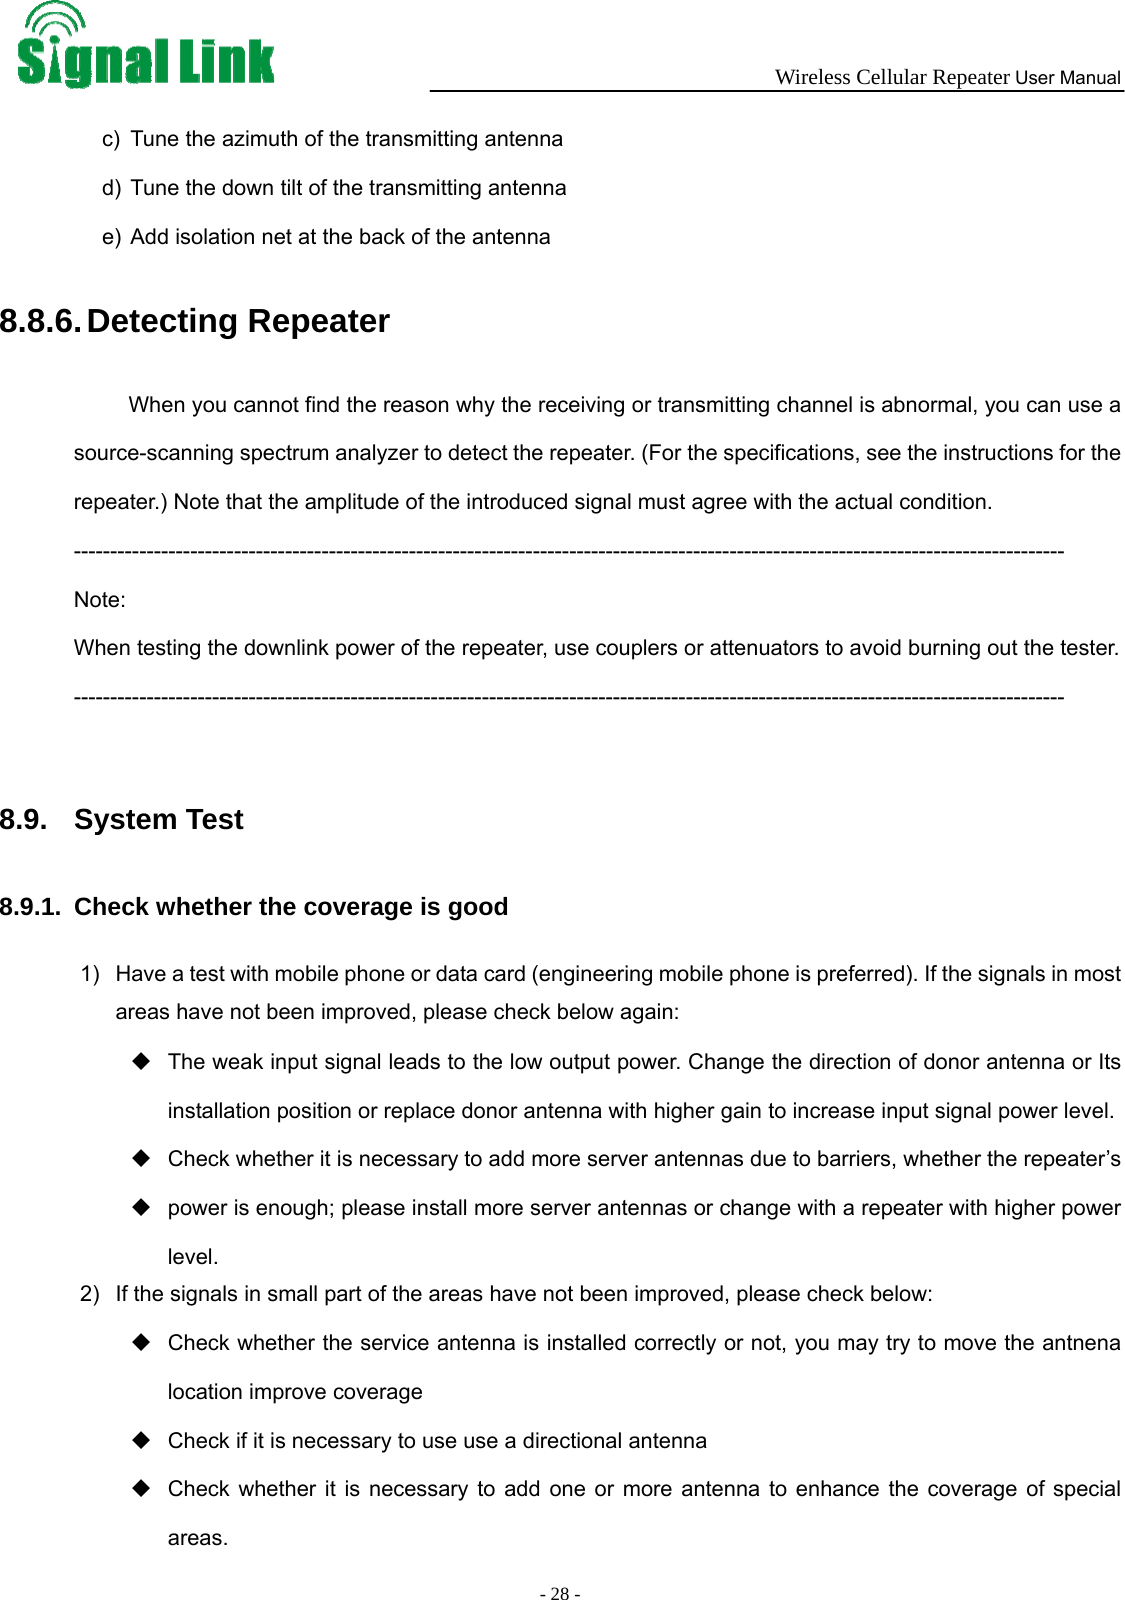  Wireless Cellular Repeater User Manual  - 28 -   c)  Tune the azimuth of the transmitting antenna d)  Tune the down tilt of the transmitting antenna e)  Add isolation net at the back of the antenna 8.8.6. Detecting Repeater When you cannot find the reason why the receiving or transmitting channel is abnormal, you can use a source-scanning spectrum analyzer to detect the repeater. (For the specifications, see the instructions for the repeater.) Note that the amplitude of the introduced signal must agree with the actual condition. ---------------------------------------------------------------------------------------------------------------------------------------- Note:  When testing the downlink power of the repeater, use couplers or attenuators to avoid burning out the tester. ----------------------------------------------------------------------------------------------------------------------------------------  8.9. System Test  8.9.1.  Check whether the coverage is good 1)  Have a test with mobile phone or data card (engineering mobile phone is preferred). If the signals in most areas have not been improved, please check below again:   The weak input signal leads to the low output power. Change the direction of donor antenna or Its installation position or replace donor antenna with higher gain to increase input signal power level.       Check whether it is necessary to add more server antennas due to barriers, whether the repeater’s   power is enough; please install more server antennas or change with a repeater with higher power level.  2)  If the signals in small part of the areas have not been improved, please check below:   Check whether the service antenna is installed correctly or not, you may try to move the antnena location improve coverage   Check if it is necessary to use use a directional antenna     Check whether it is necessary to add one or more antenna to enhance the coverage of special areas.  